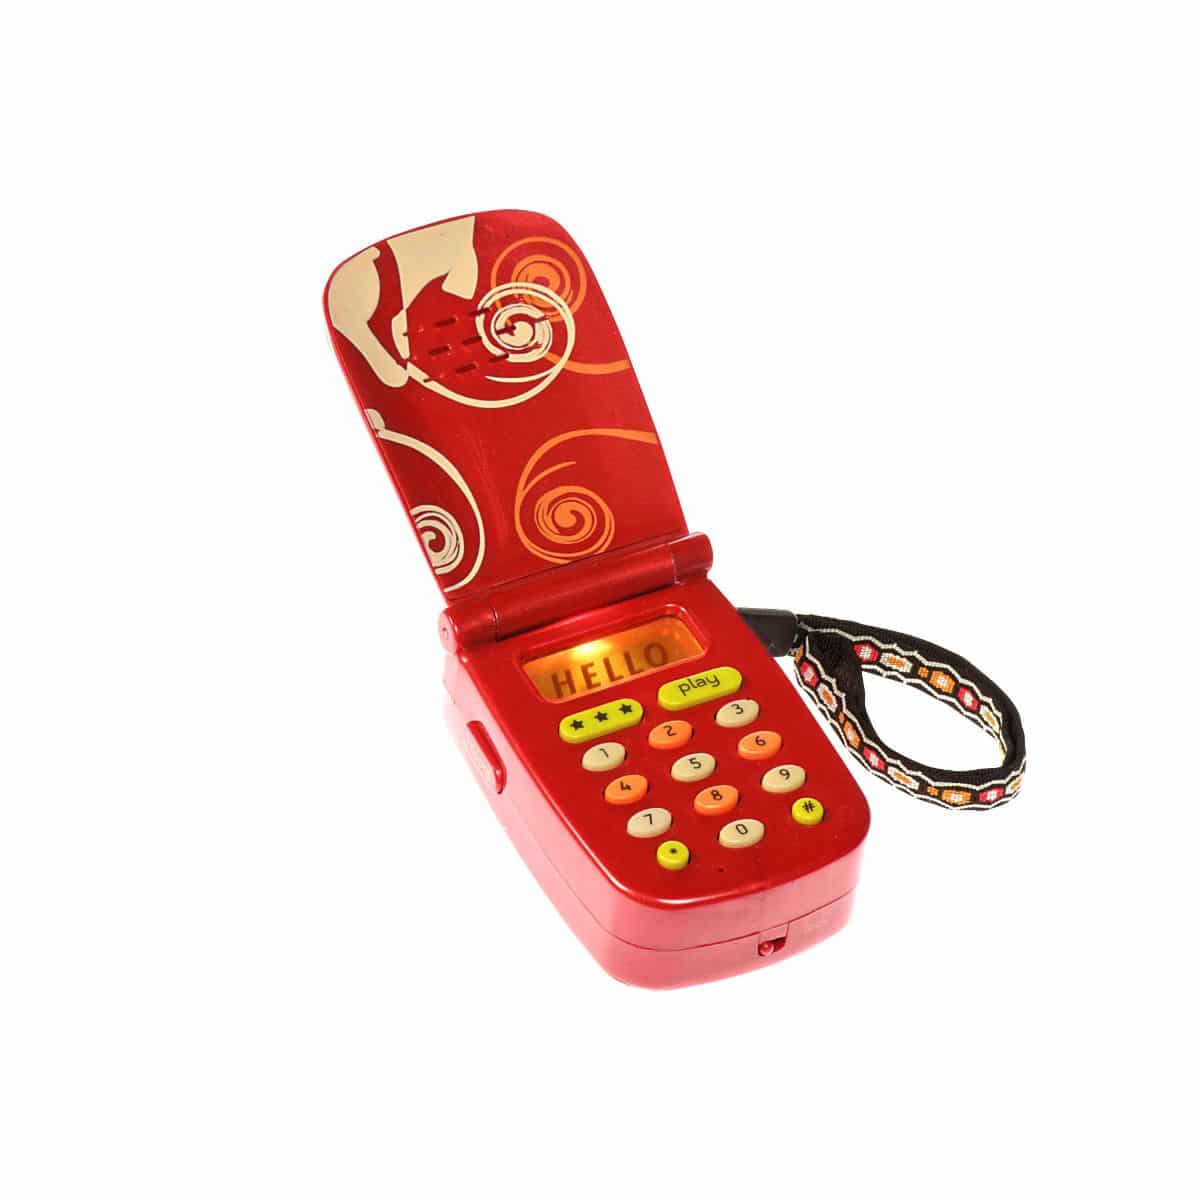 Hellophone - Red, Interactive Toy Cellphone